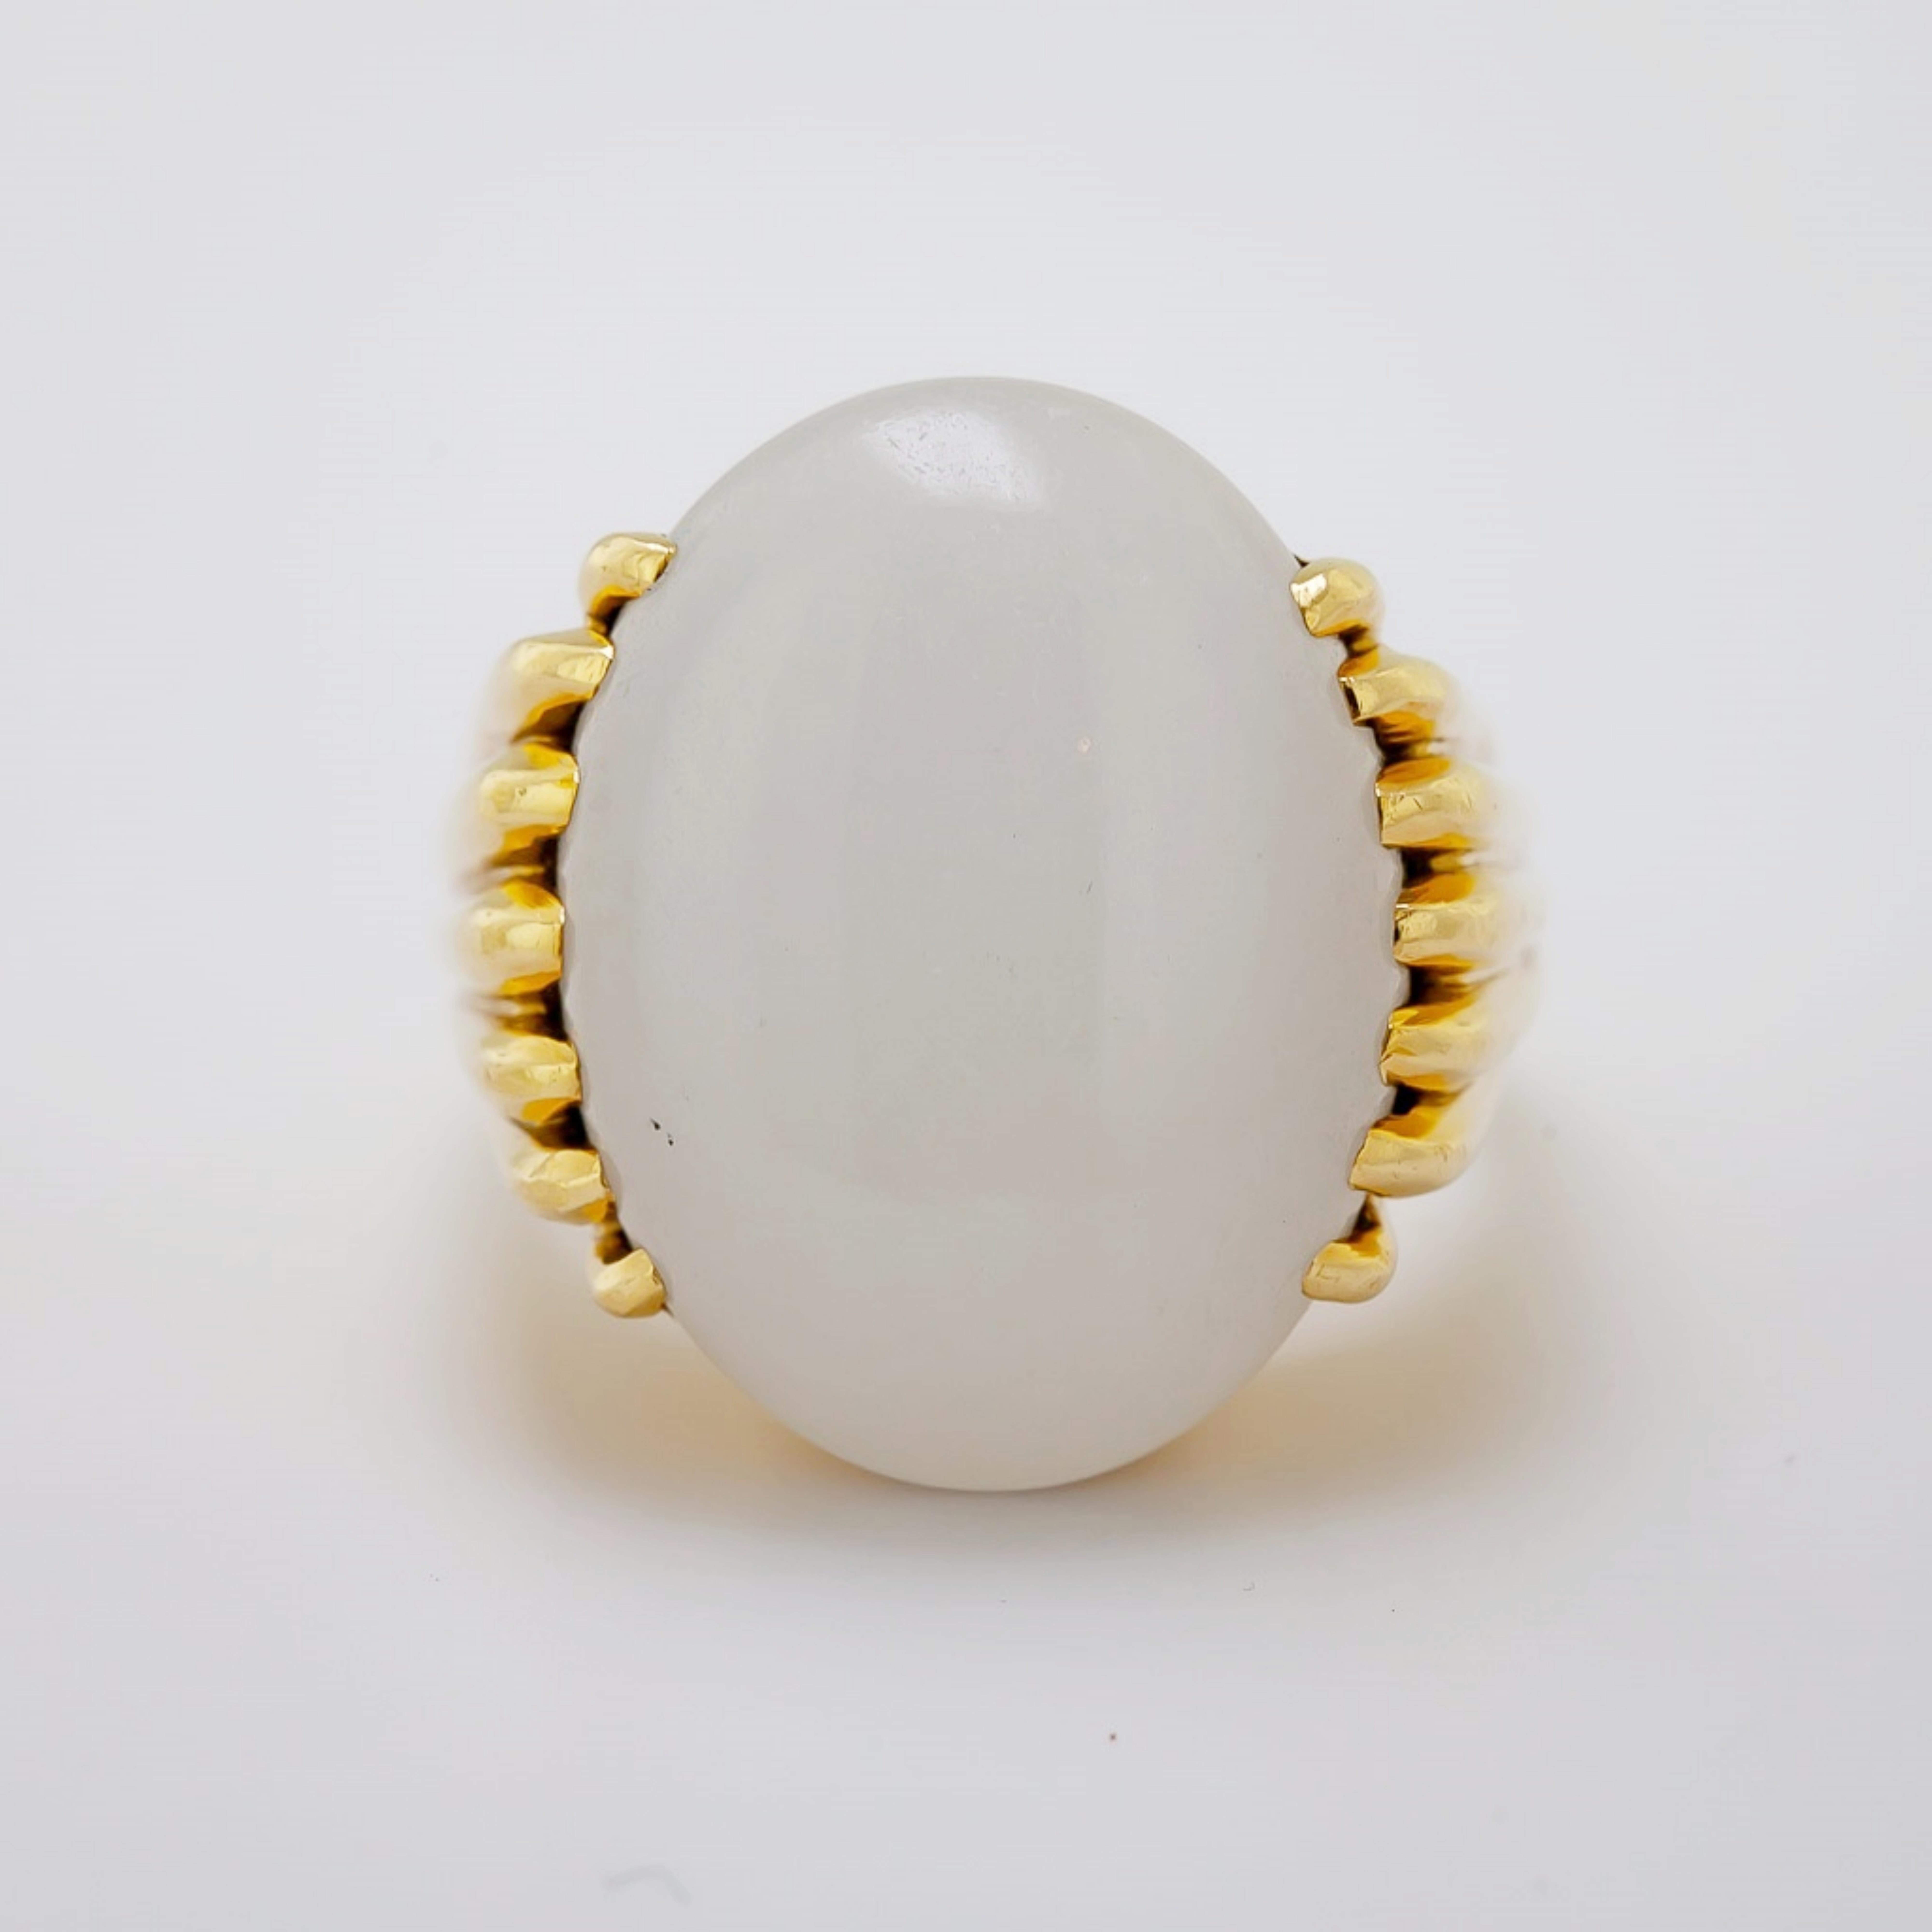 Featuring one natural white, semi translucent oval cabochon, 20.27 X 15.05 X 6.29 mm,
accompanied by a Mason Kay Report, stating No Dye or Impregnation Detected – ‘A’ Jade, fourteen prong set in an 18k yellow gold ring, marked GUMPS, size 6.5, Gross